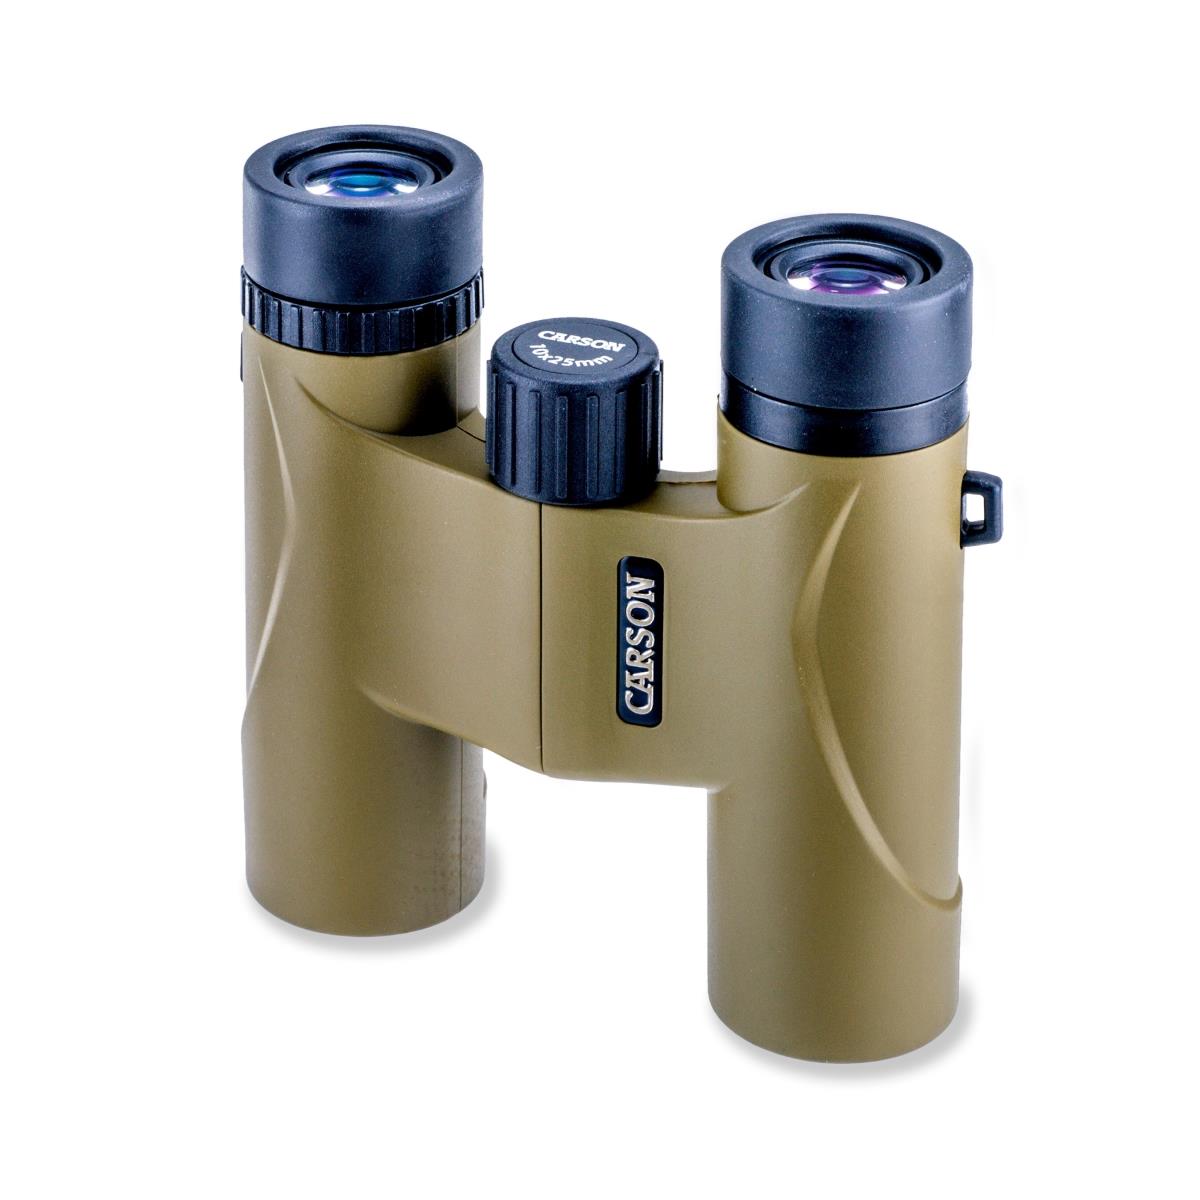 Picture of Carson HW-025 10 x 25 mm Stinger Compact Binocular